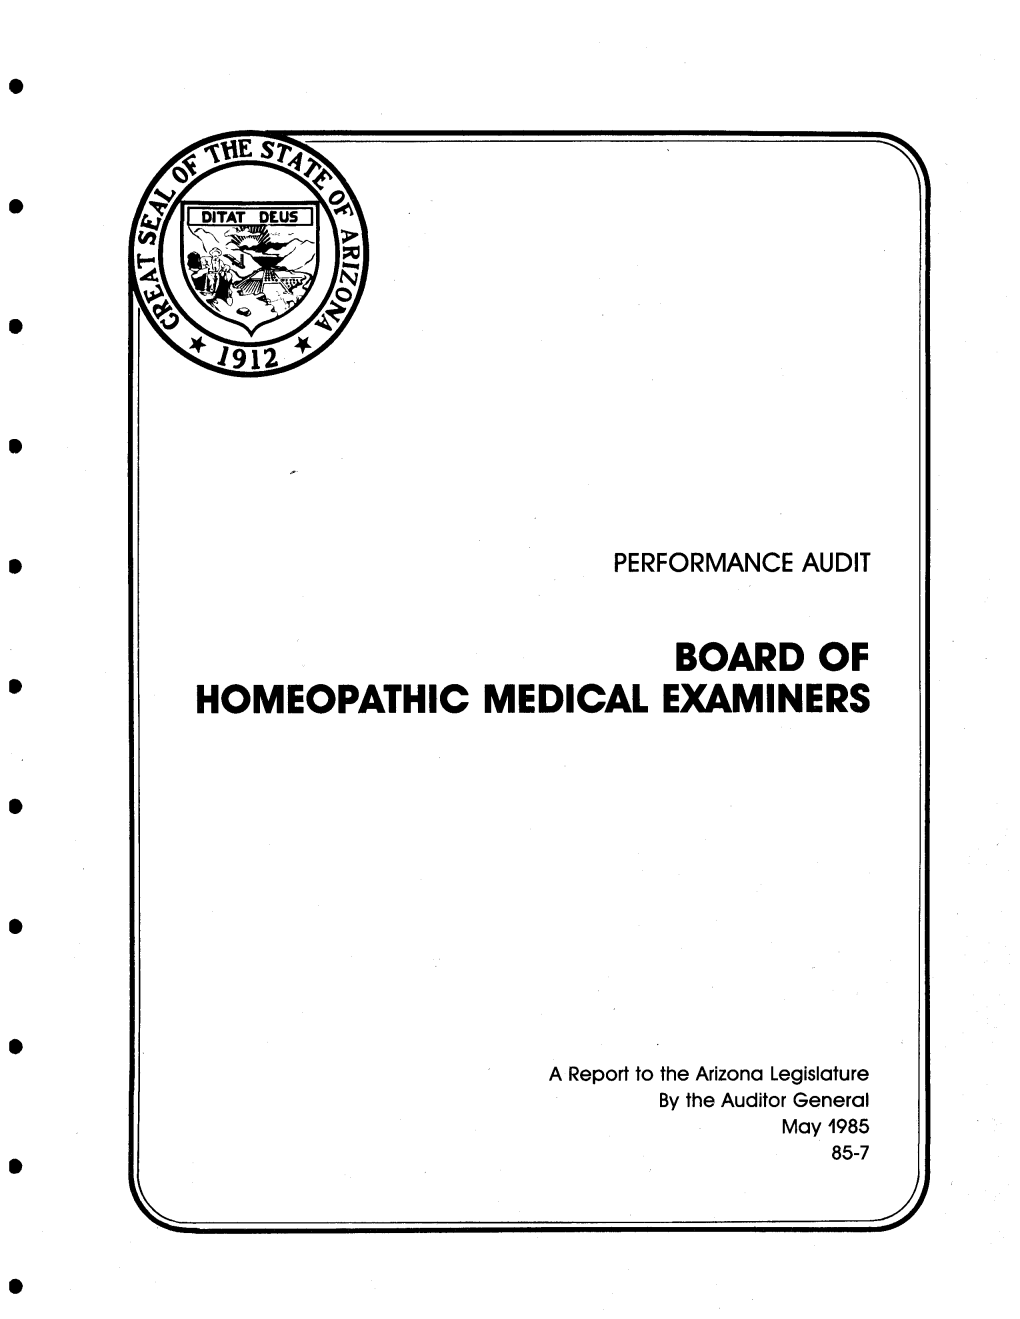 Report of the Auditor General, a Performance Audit of the Board of Homeopathic Medical Examiners